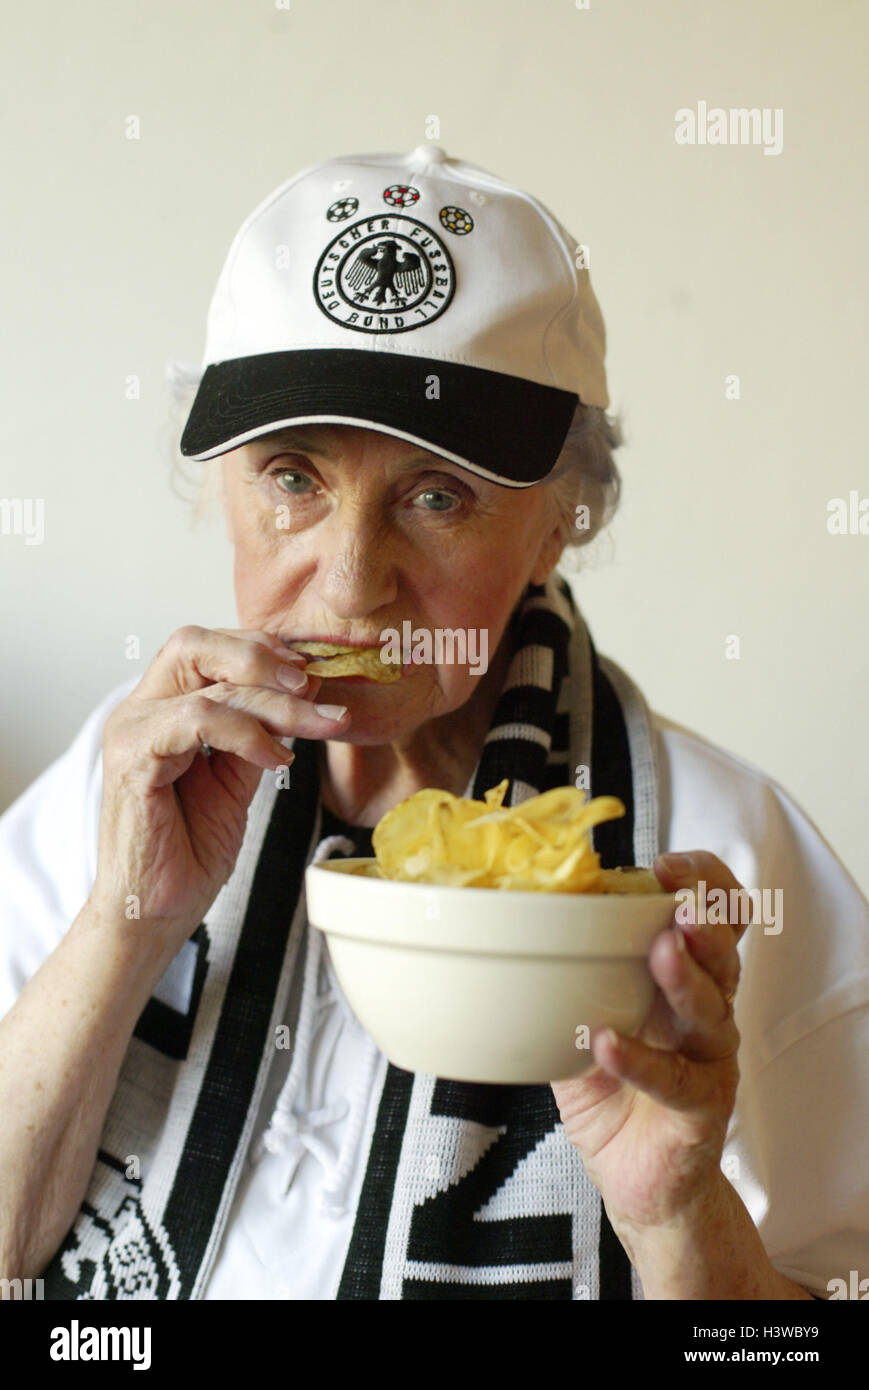 Senior, football fan, watch, concentrates, crisps, portrait, sport, football match, football match, spectator, senior, pensioner, woman, old, agile, actively, actively, young remaining, fan, follower, football follower, hobby, entrancedly, excommunicated, Stock Photo